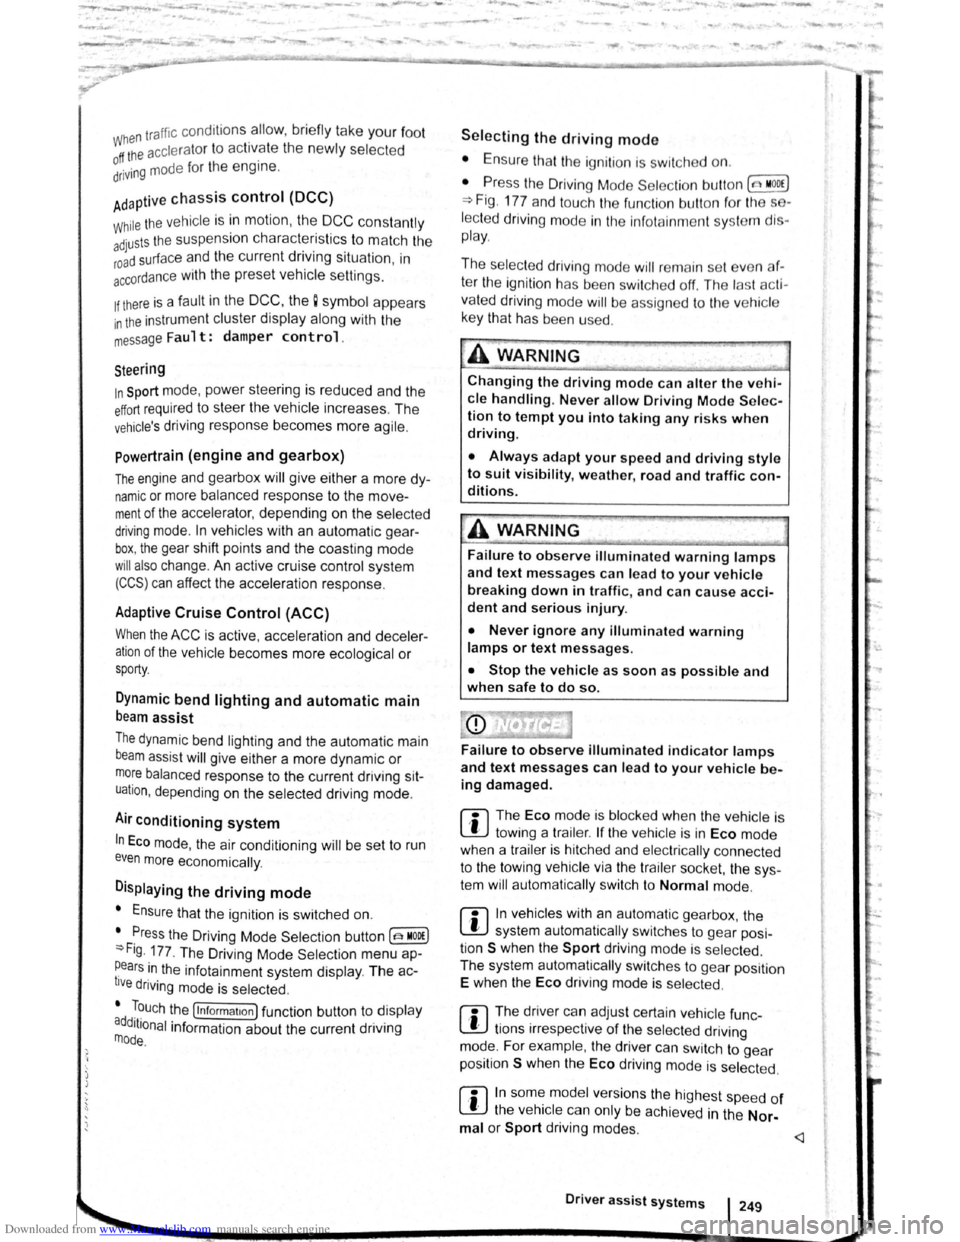 VOLKSWAGEN BEETLE 2009  Owners Manual Downloaded from www.Manualslib.com manuals search engine  J J 
 ·,  '~ 
 i  
traff ic c ond itions  allow,  briefly  take your foot 
When accle rator  to activate  the newly selected off the 